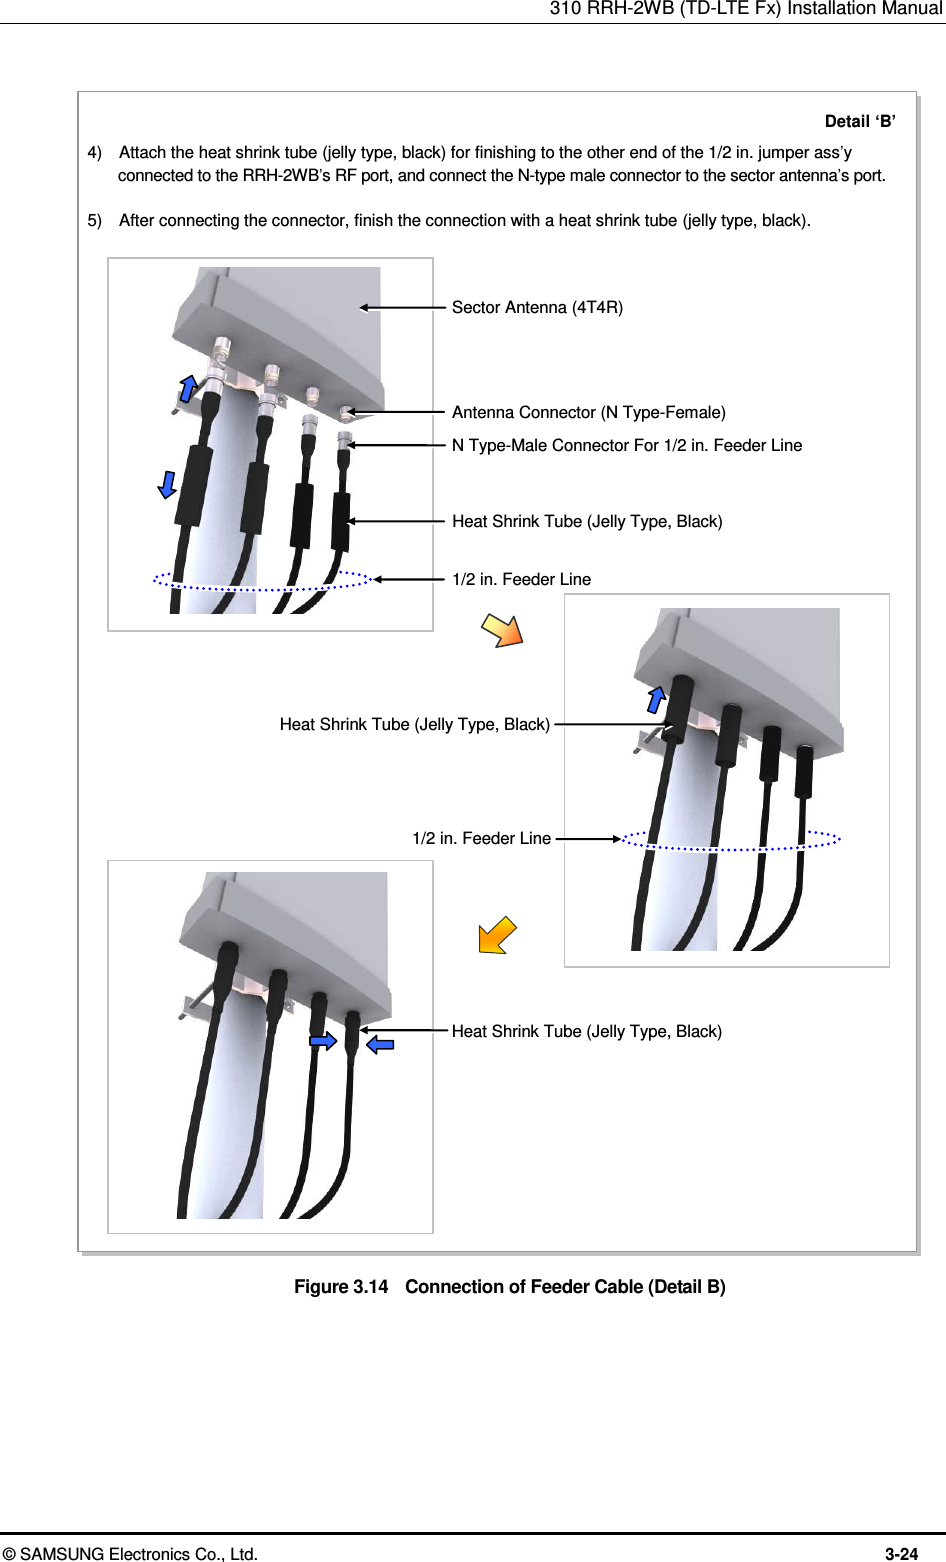 310 RRH-2WB (TD-LTE Fx) Installation Manual  © SAMSUNG Electronics Co., Ltd.  3-24  Figure 3.14    Connection of Feeder Cable (Detail B)  케이블 랙N Type-Male Connector For 1/2 in. Feeder Line Heat Shrink Tube (Jelly Type, Black) 1/2 in. Feeder Line Antenna Connector (N Type-Female) Detail ‘B’ Sector Antenna (4T4R) Heat Shrink Tube (Jelly Type, Black) 1/2 in. Feeder Line Heat Shrink Tube (Jelly Type, Black) 4)    Attach the heat shrink tube (jelly type, black) for finishing to the other end of the 1/2 in. jumper ass’y connected to the RRH-2WB’s RF port, and connect the N-type male connector to the sector antenna’s port.  5)    After connecting the connector, finish the connection with a heat shrink tube (jelly type, black).  